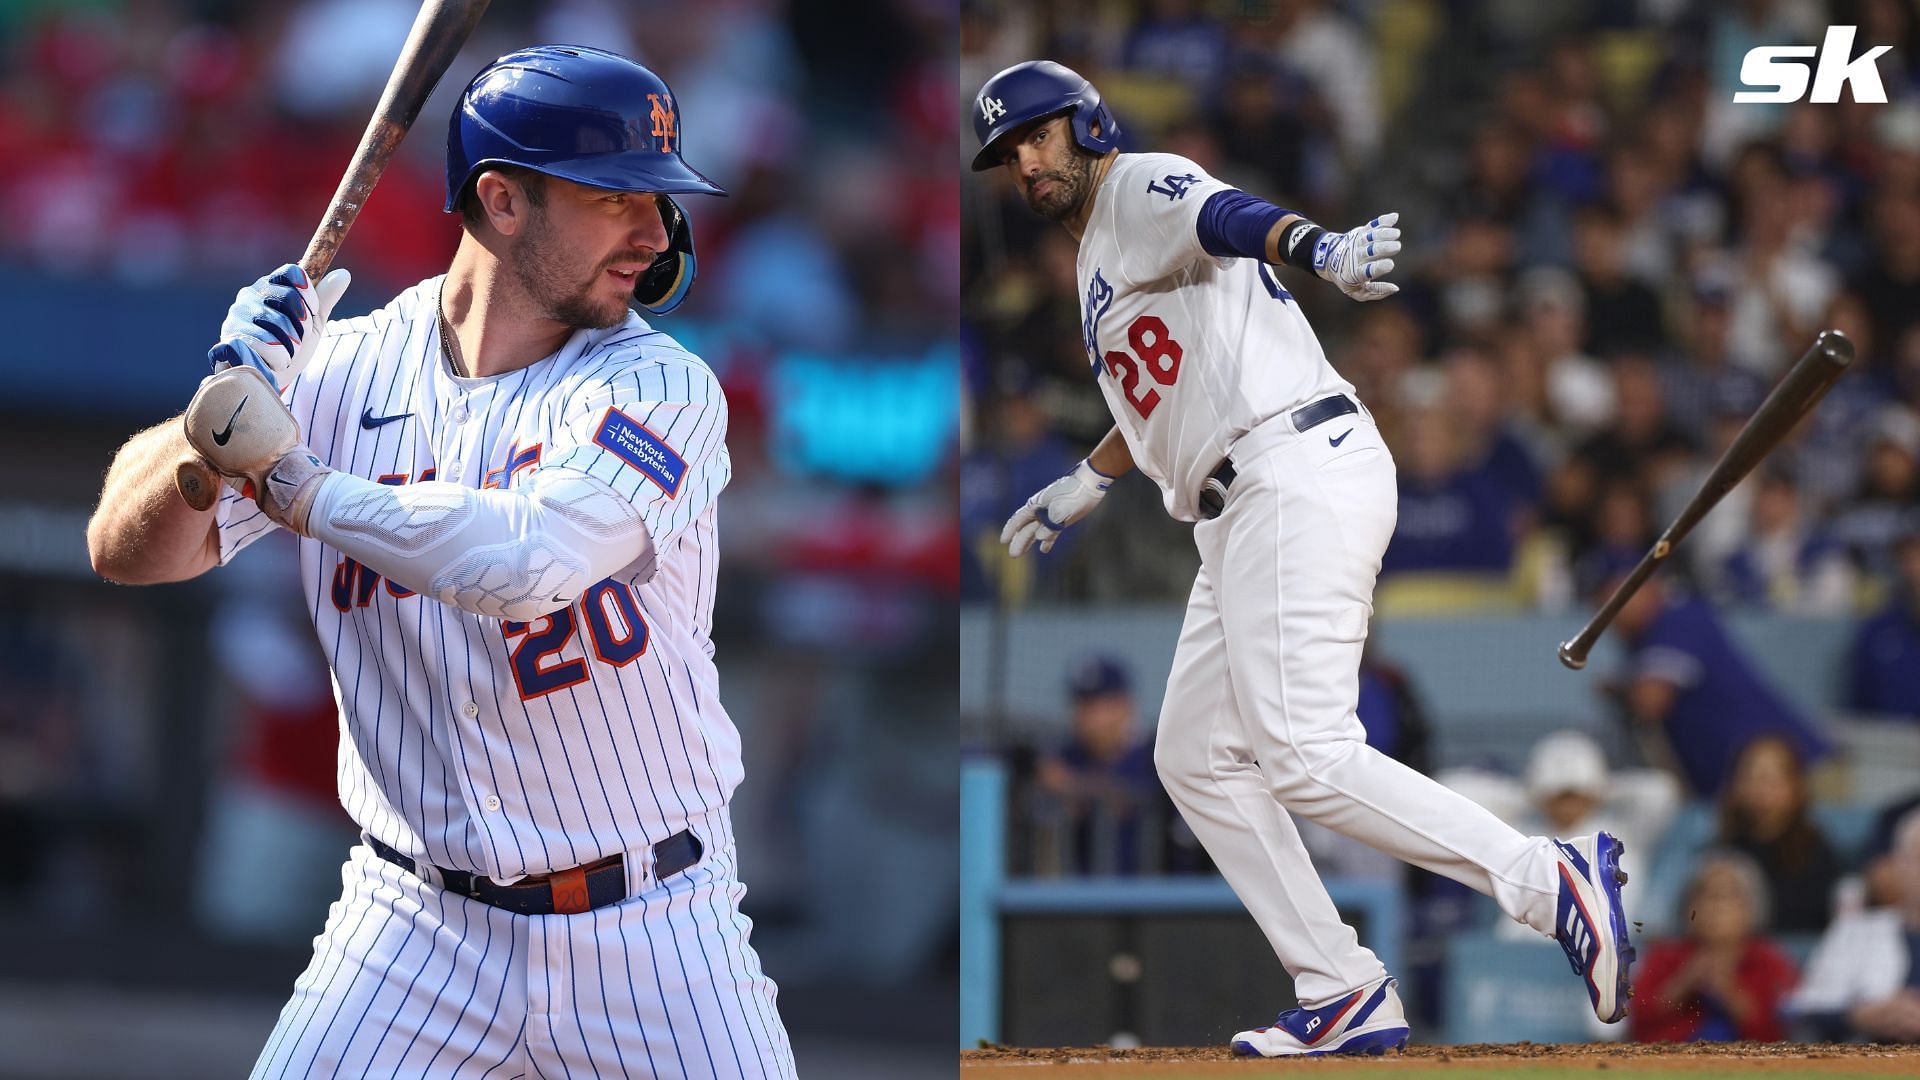 Mets fans reignite hope with addition of J.D. Martinez to opening day roster